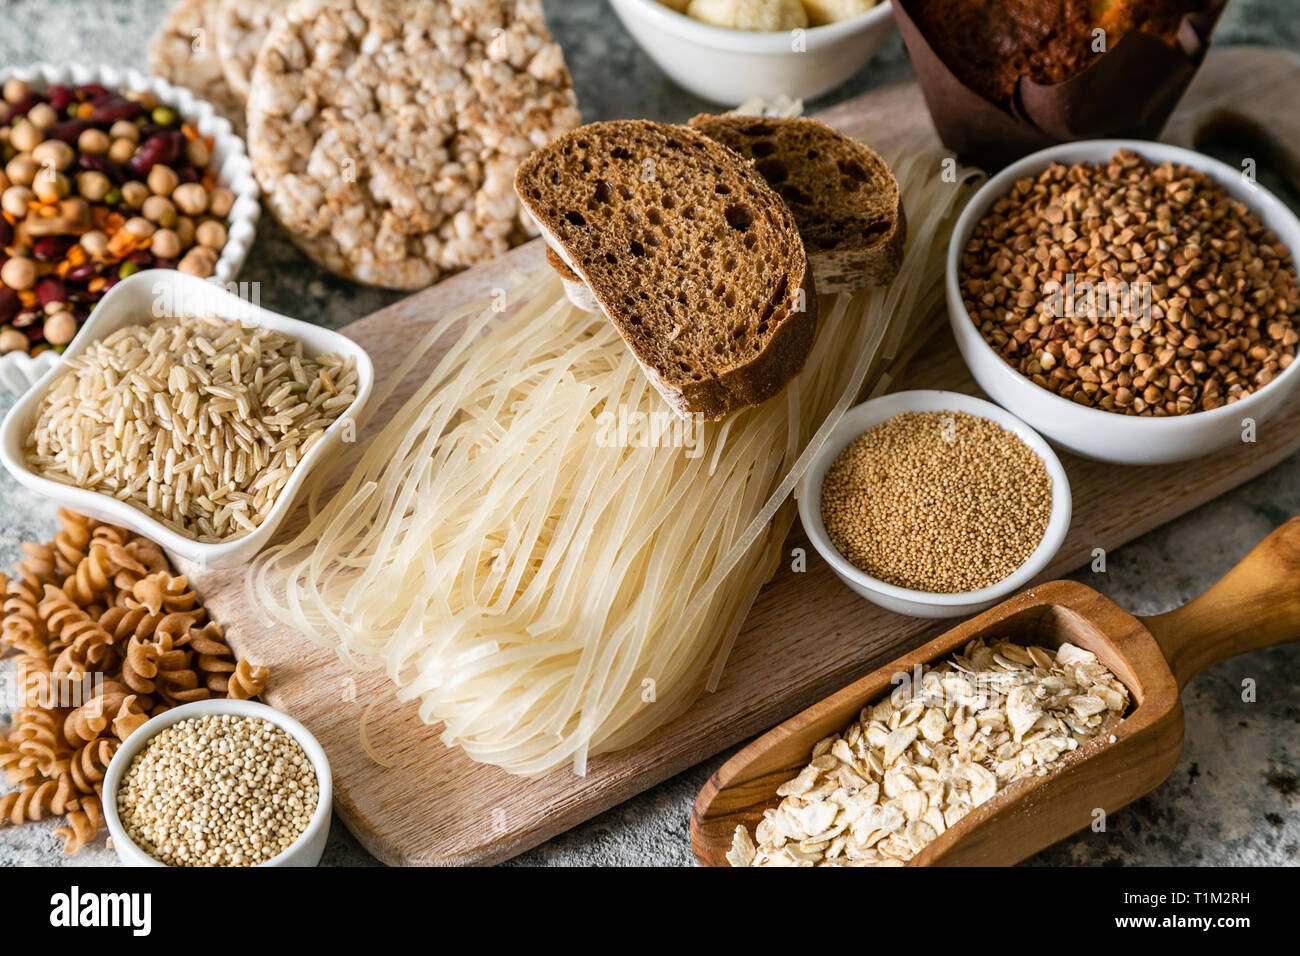 Gluten free diet concept - selection of grains and carbohydrates for people with gluten intolerance Stock Photo